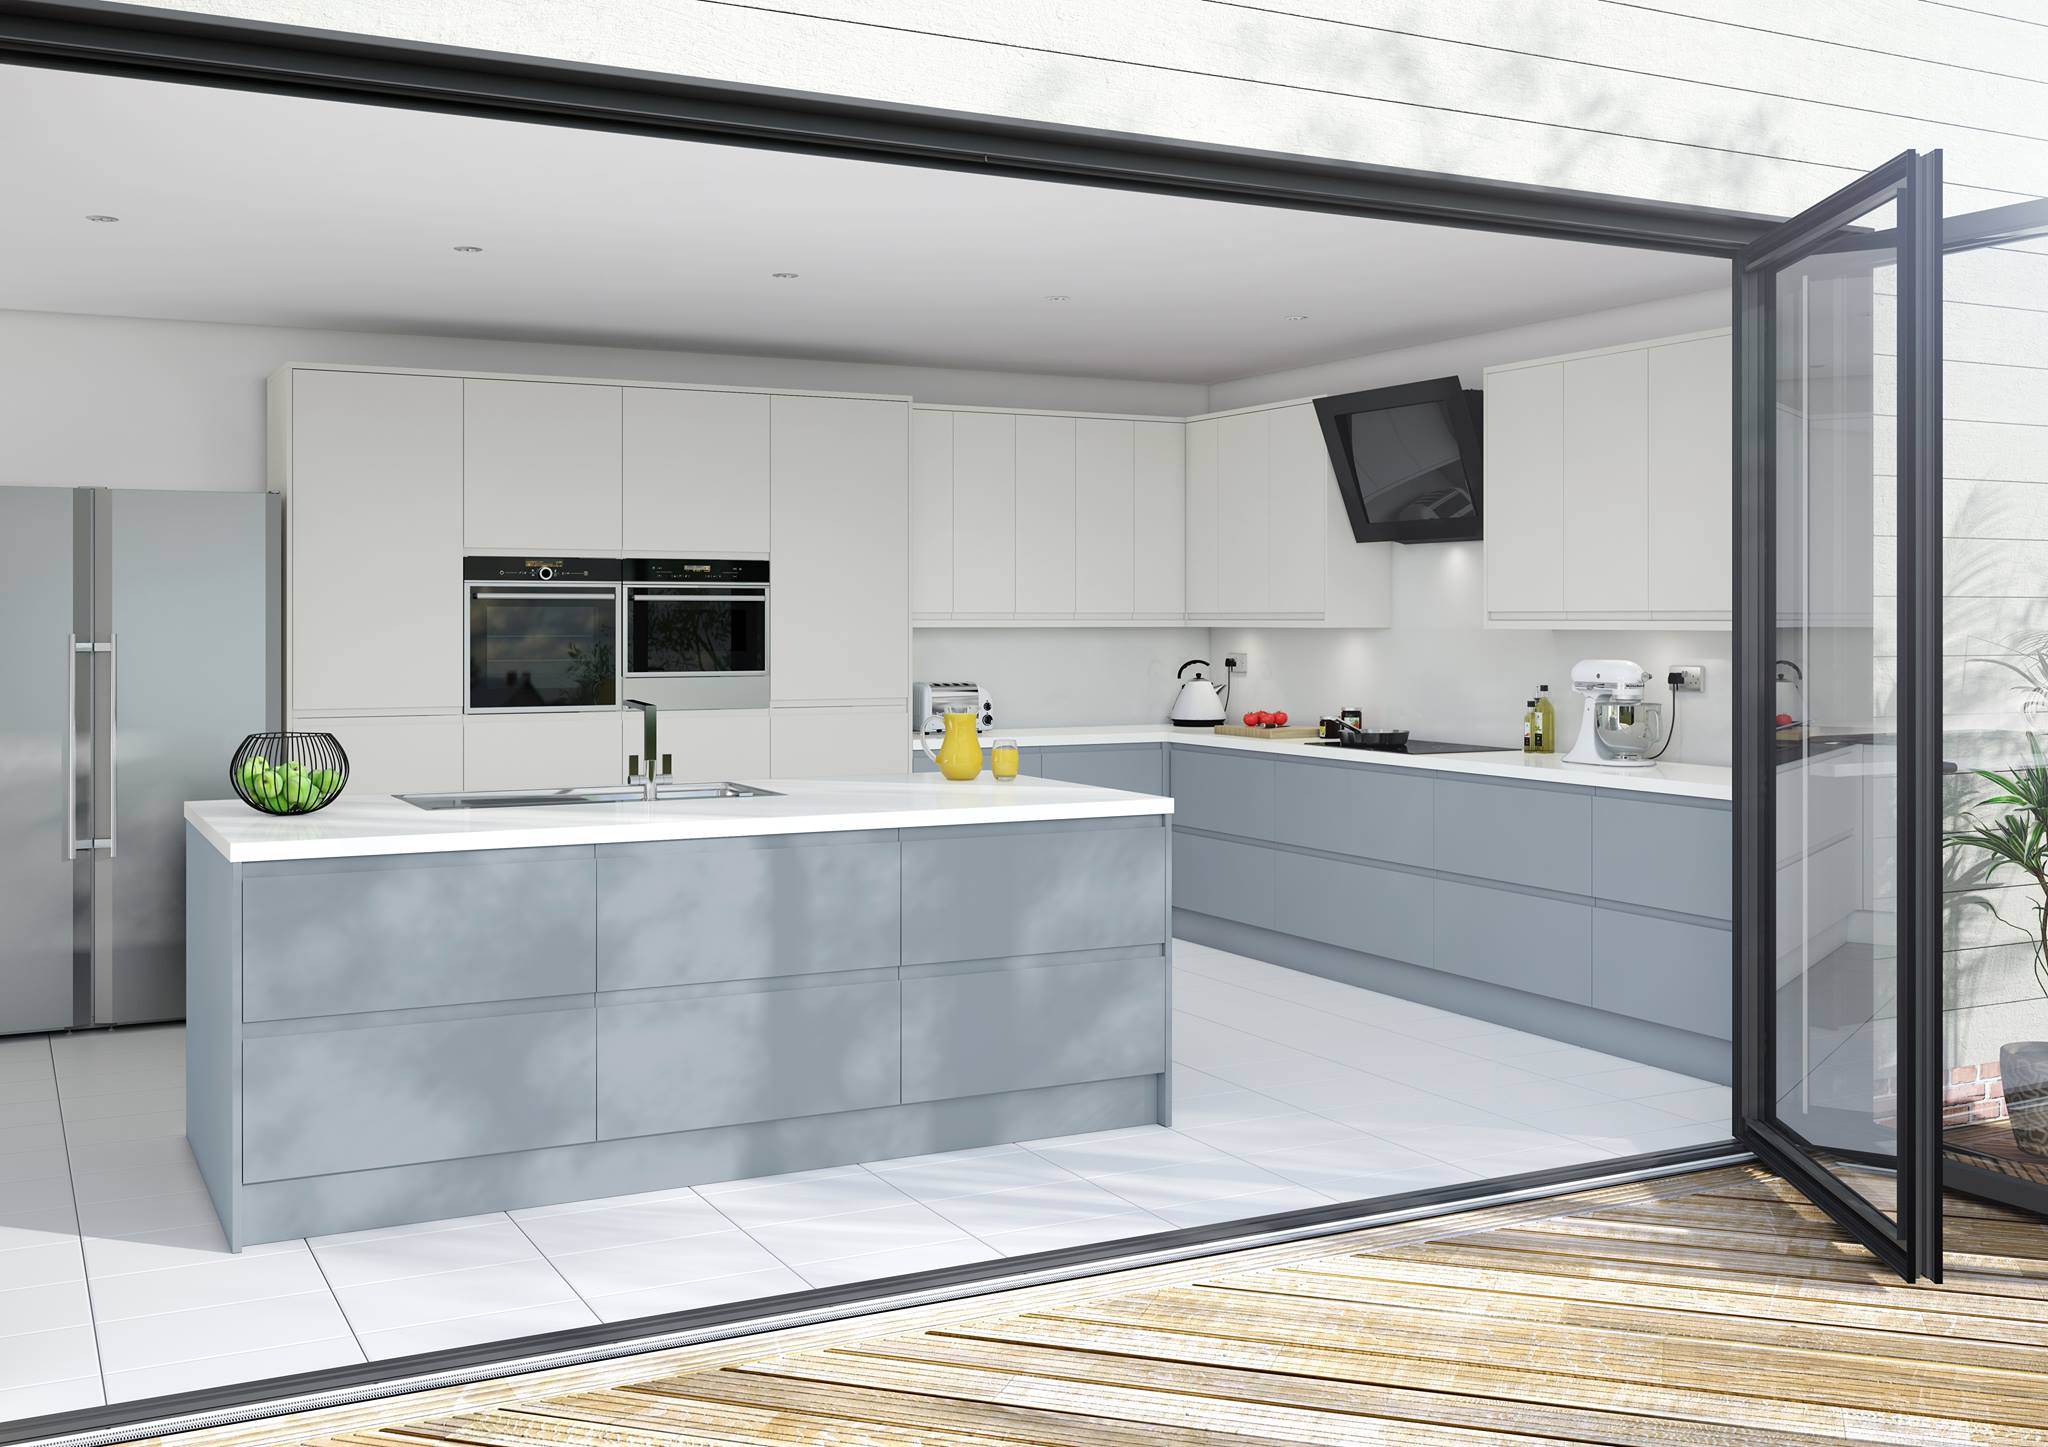 How To Find The Best Value Fitted Kitchen Supplier